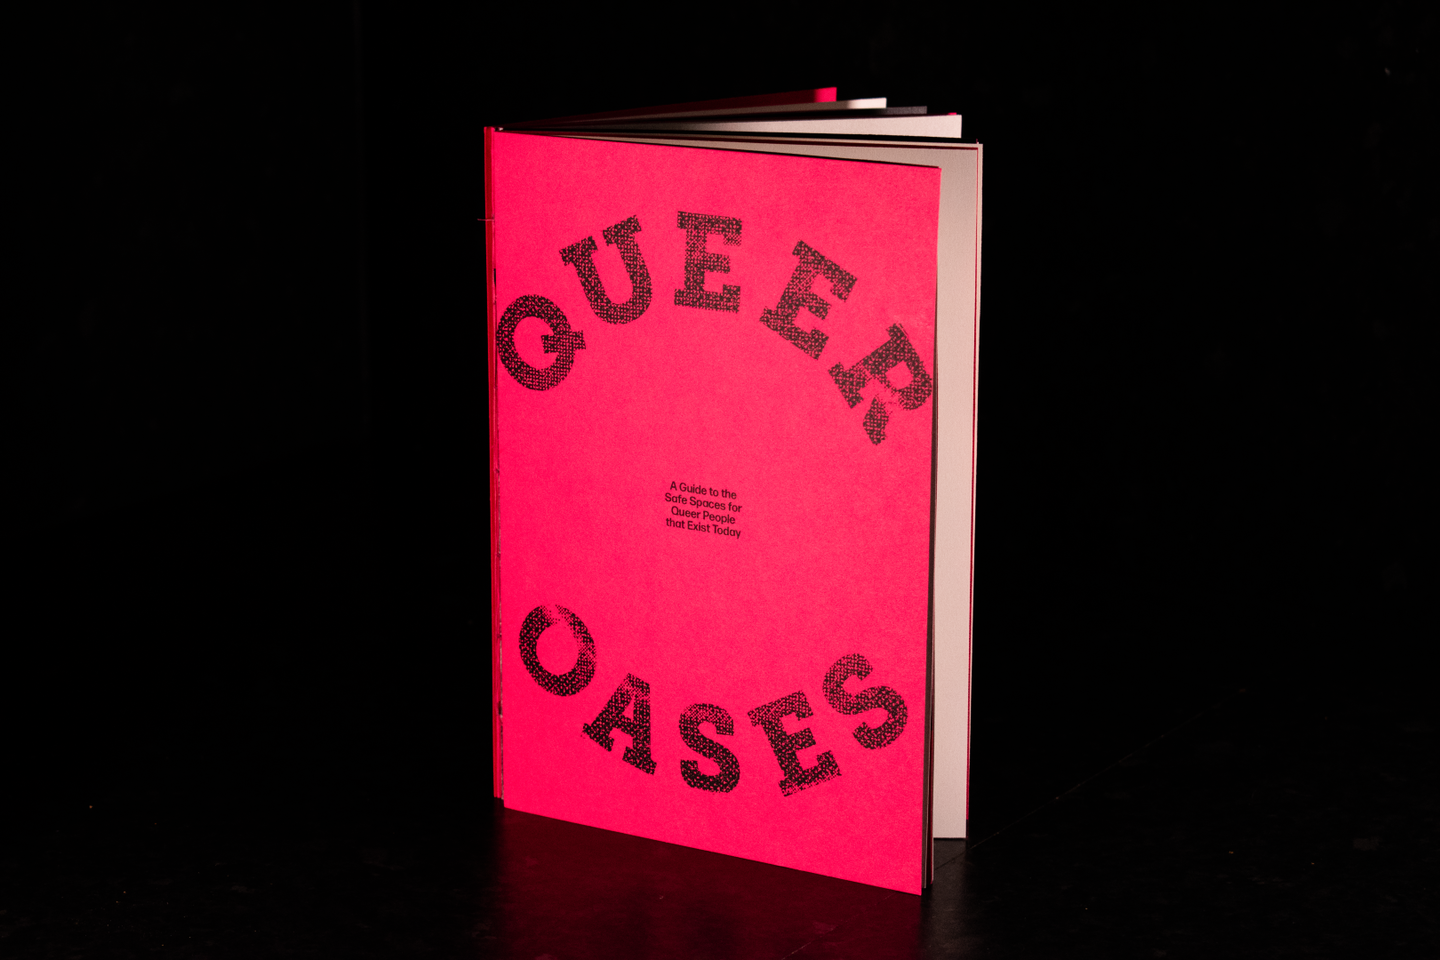 Connor Donnelly's Physic ISTD book submission, Queer Oases